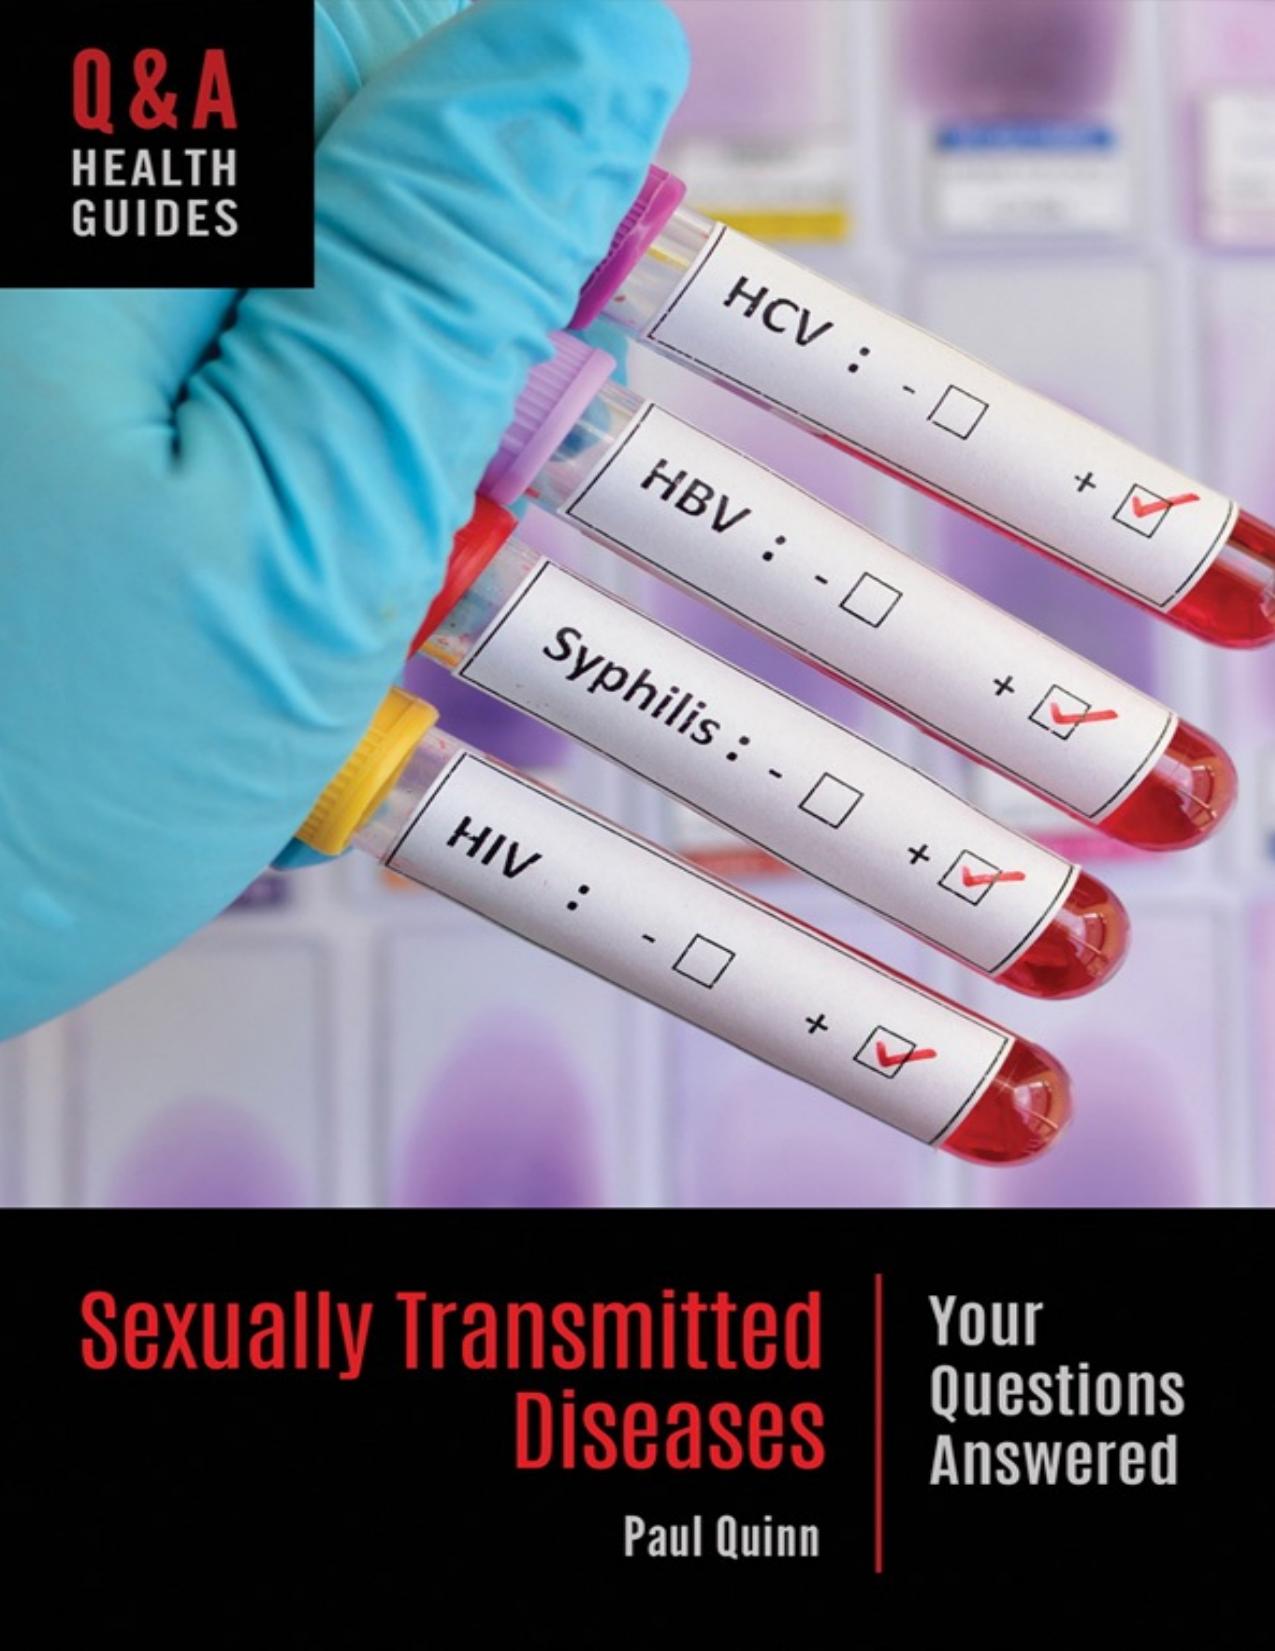 Sexually Transmitted Diseases: Your Questions Answered \(Q\&A Health Guides\) - PDFDrive.com